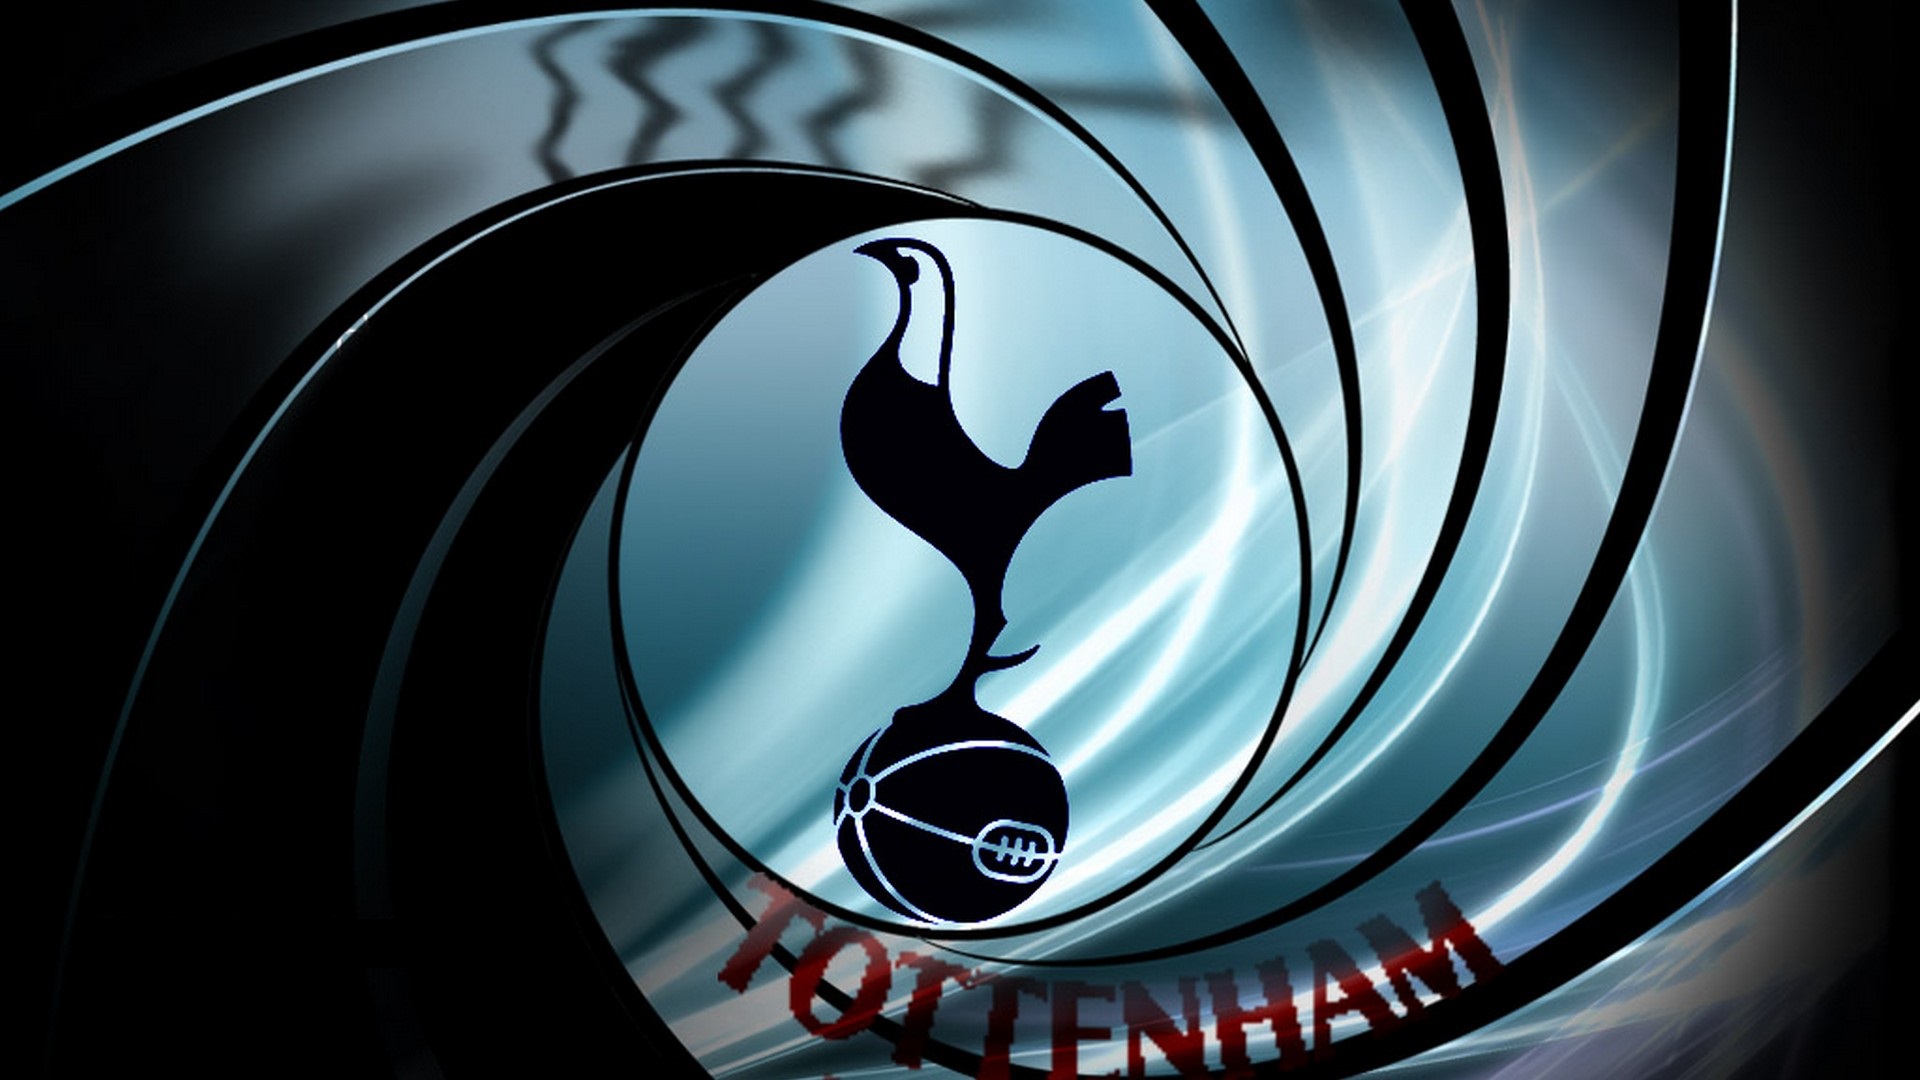 Wallpapers Computer Tottenham Hotspur With high-resolution 1920X1080 pixel. You can use this wallpaper for your Desktop Computer Backgrounds, Mac Wallpapers, Android Lock screen or iPhone Screensavers and another smartphone device